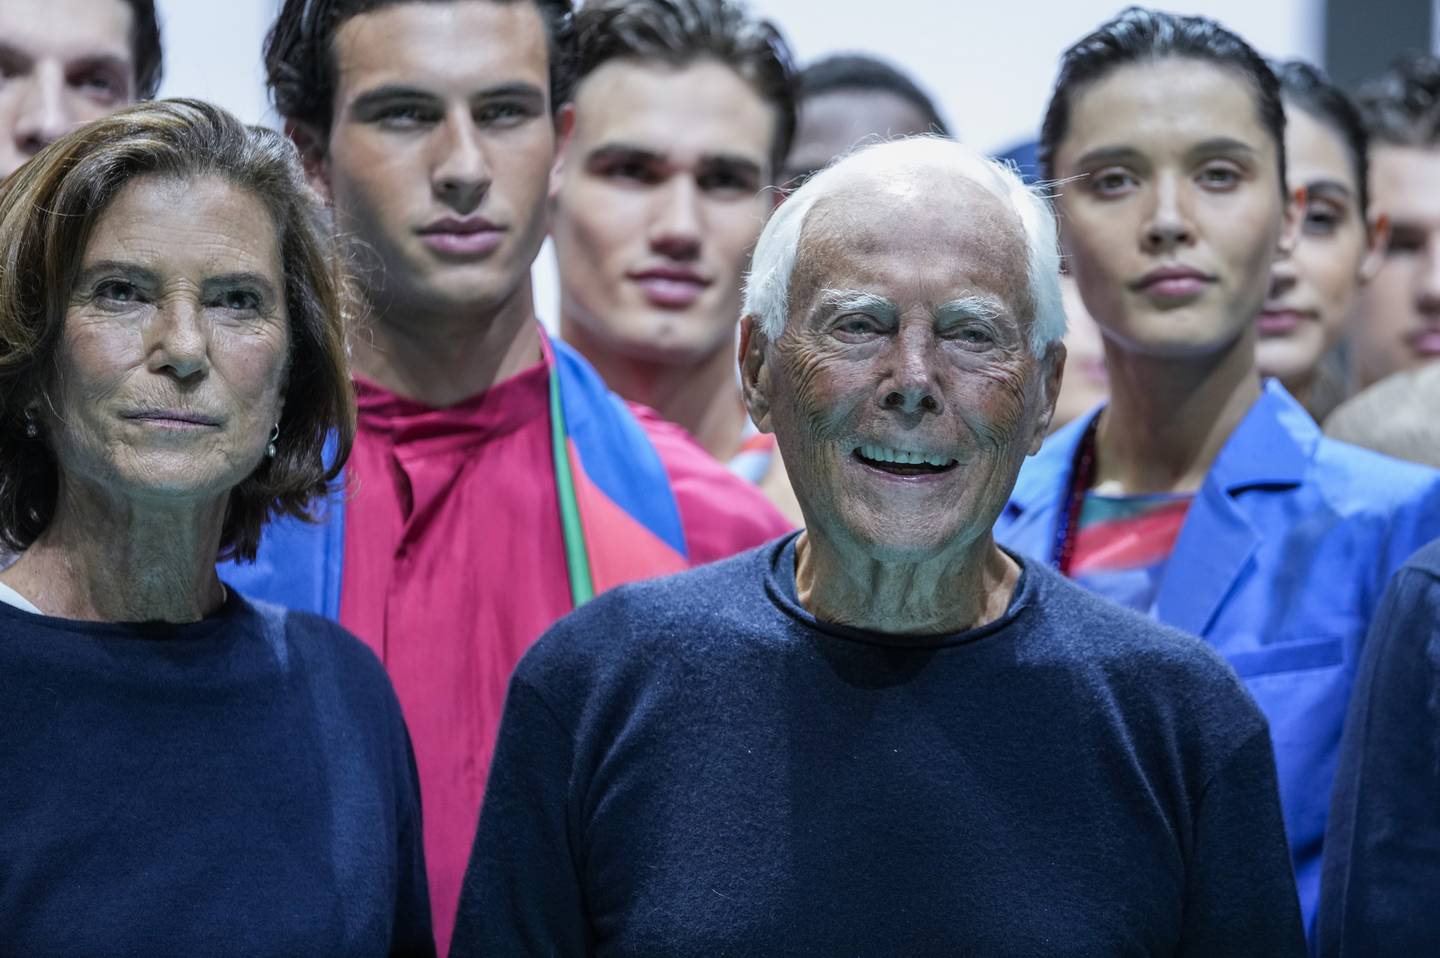 Giorgio Armani has announced that he is canceling his men's fashion show in <a class=